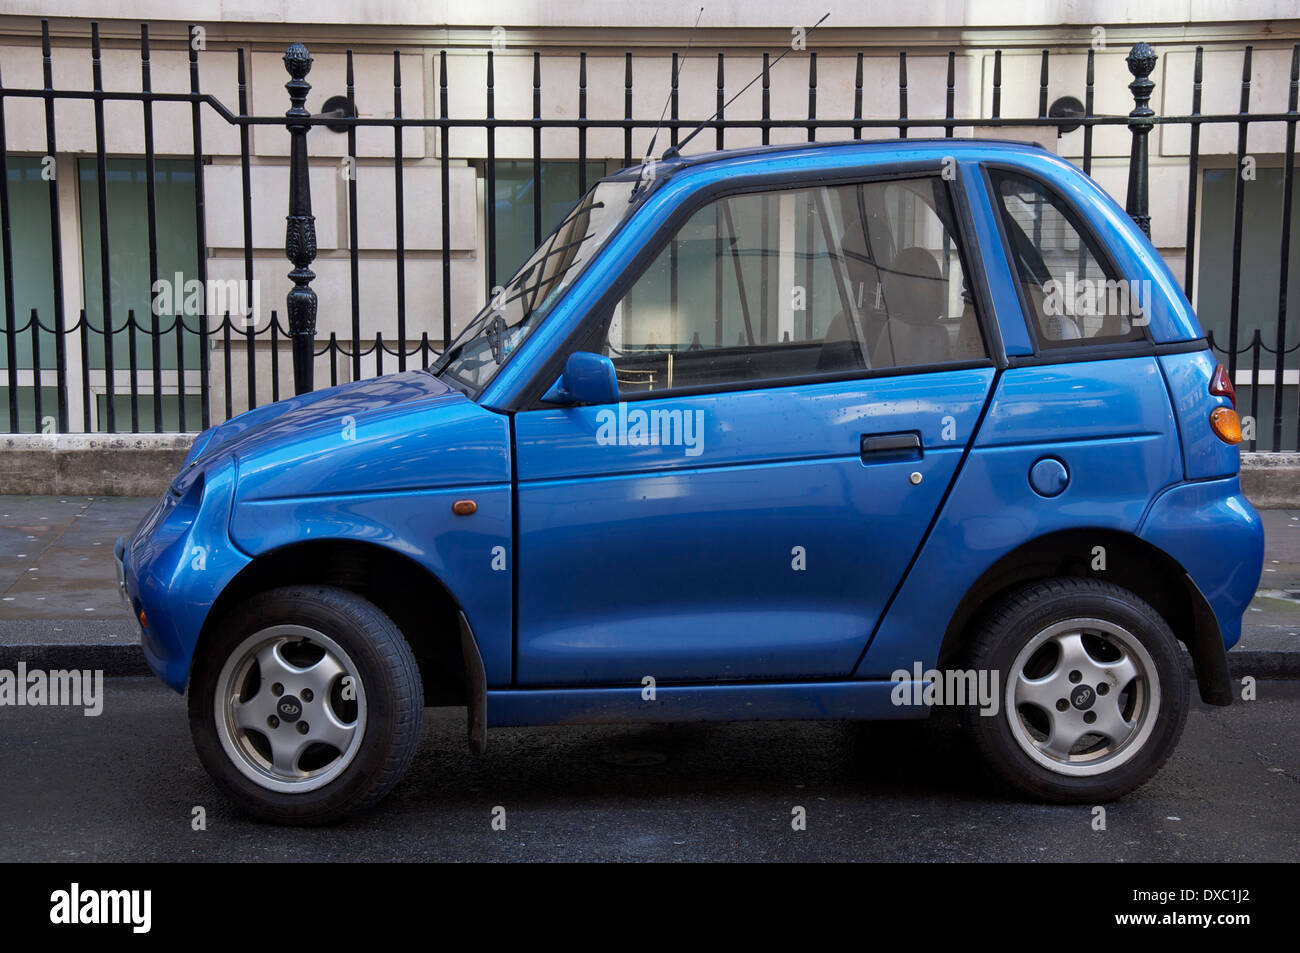 The Revai Manufactured By The Reva Electric Car Company Of India Is A Small Automatic Electric Vehicle Ev In The Uk It Is Known As The G Wiz Stock Photo Alamy